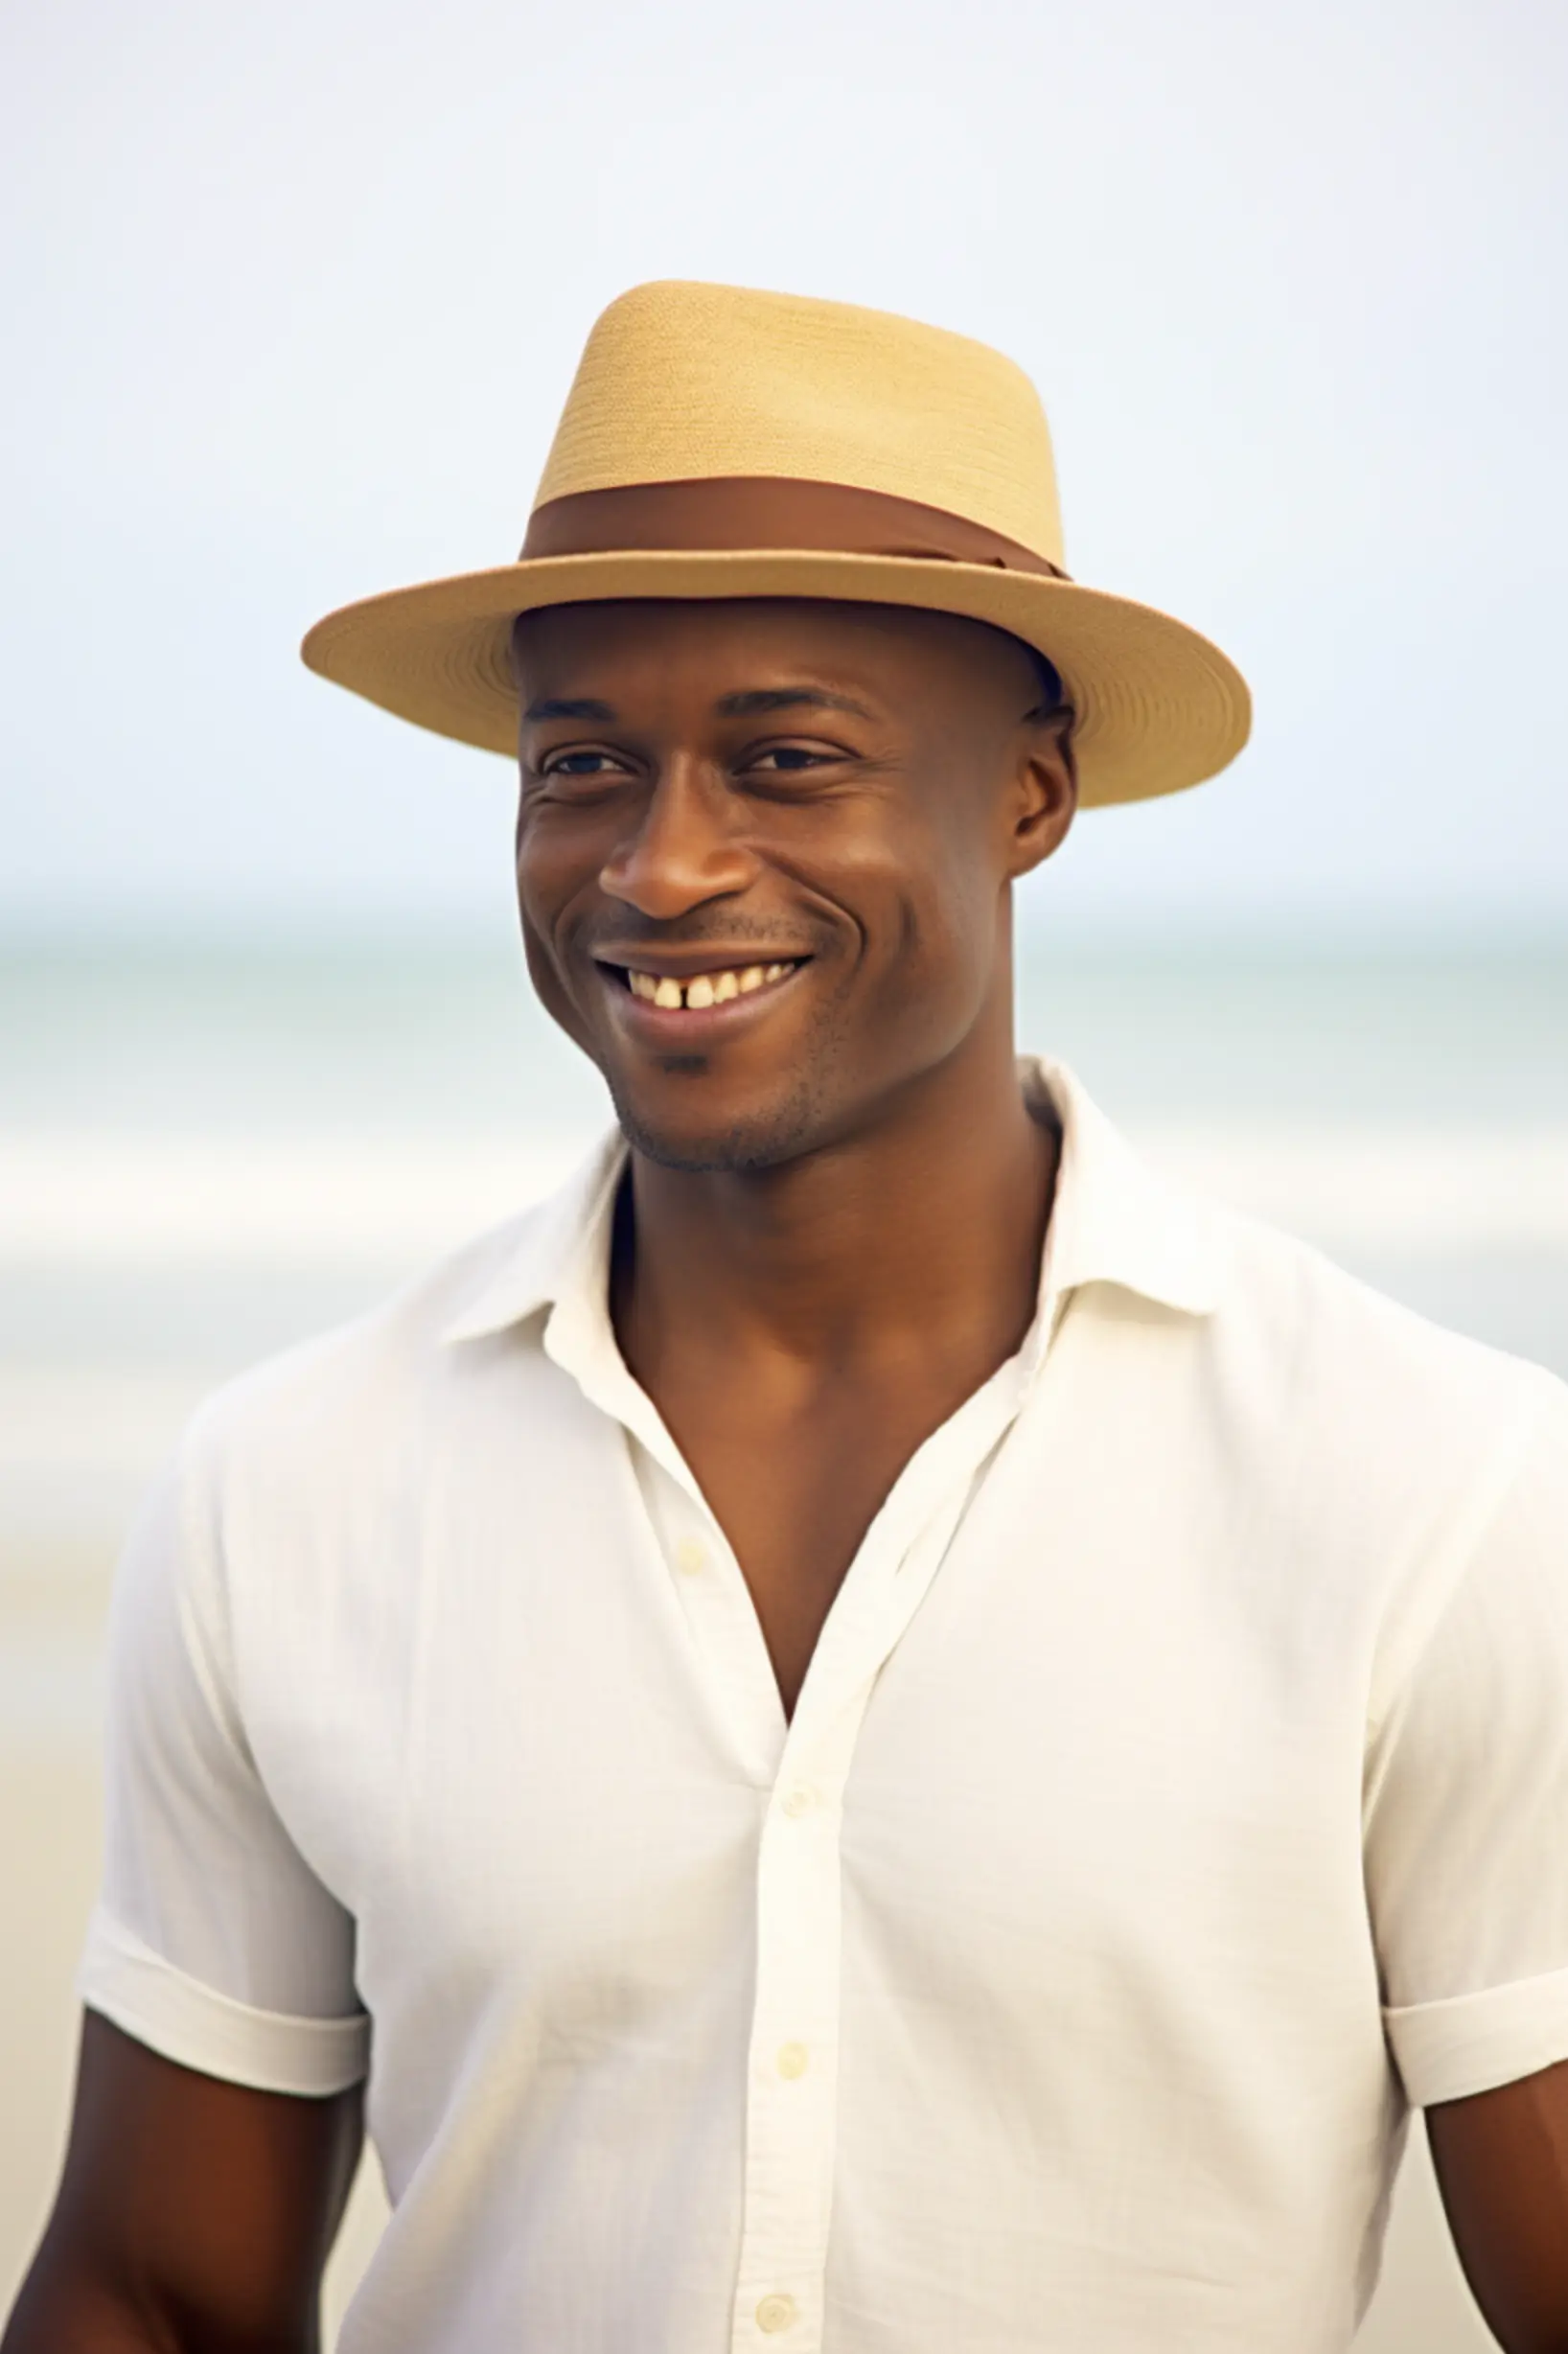 man smiling on beach with hat on